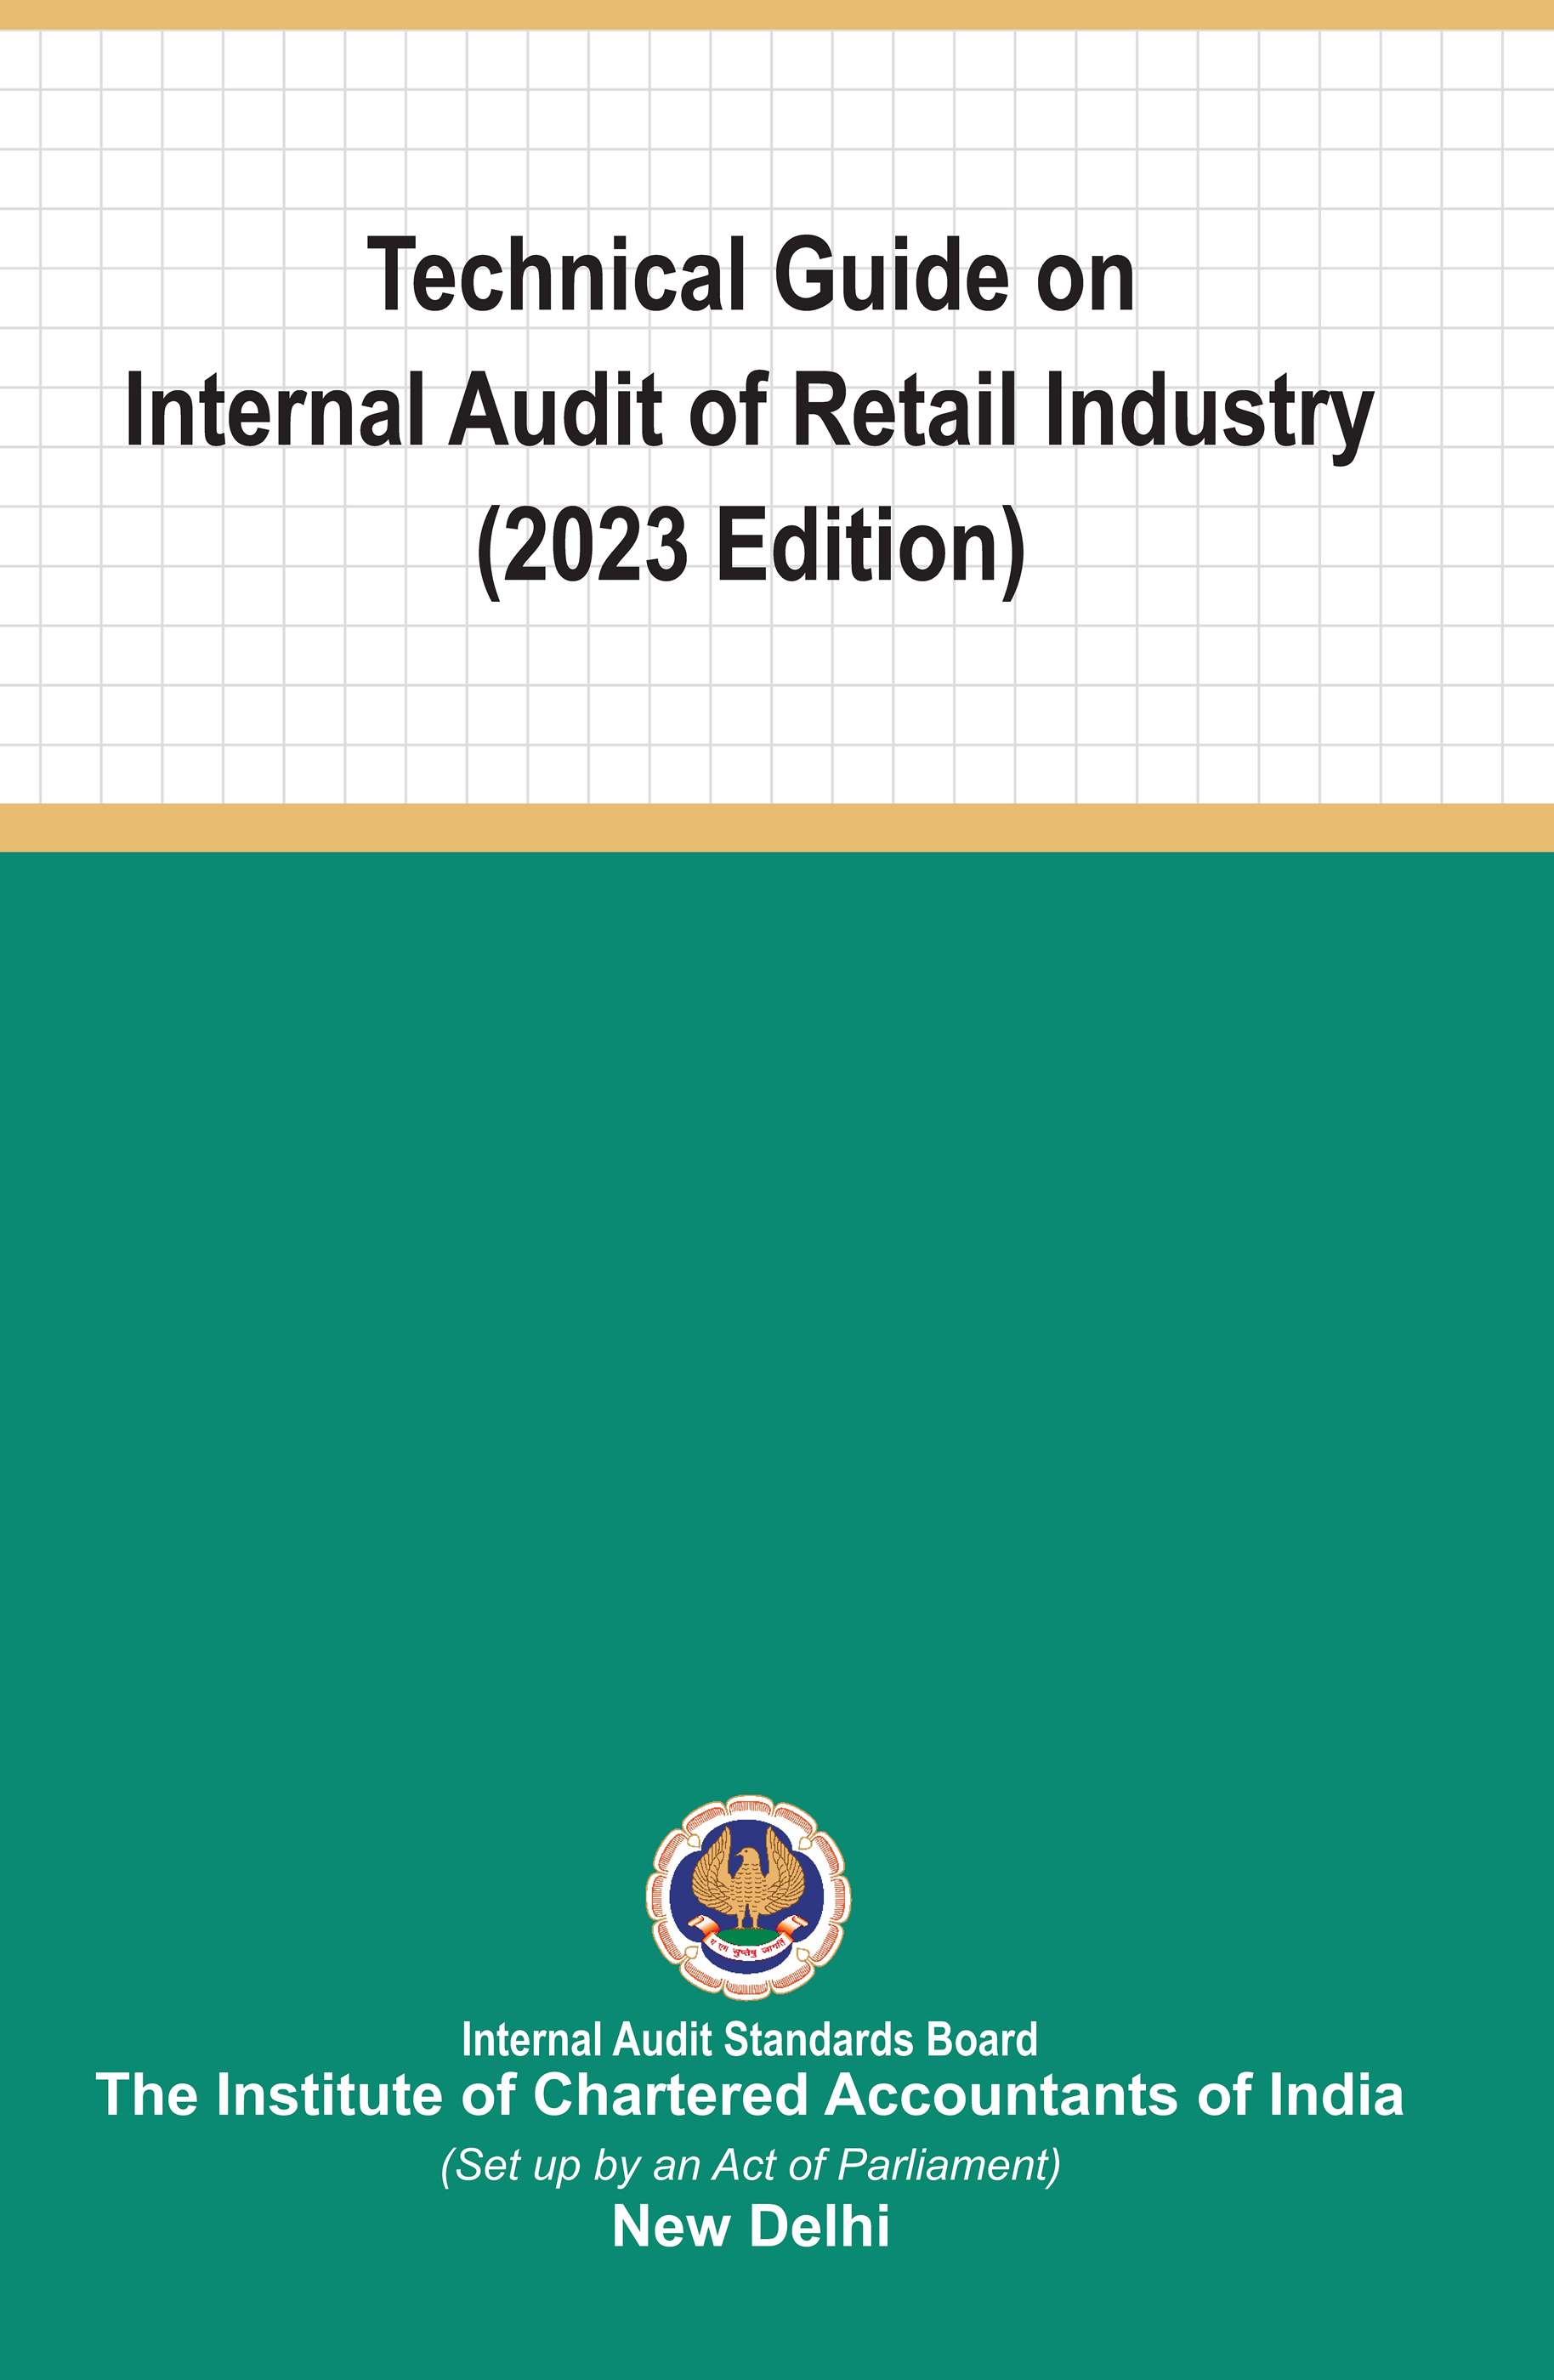 Technical Guide on Internal Audit of Retail Industry (2023 Edition) February, 2023